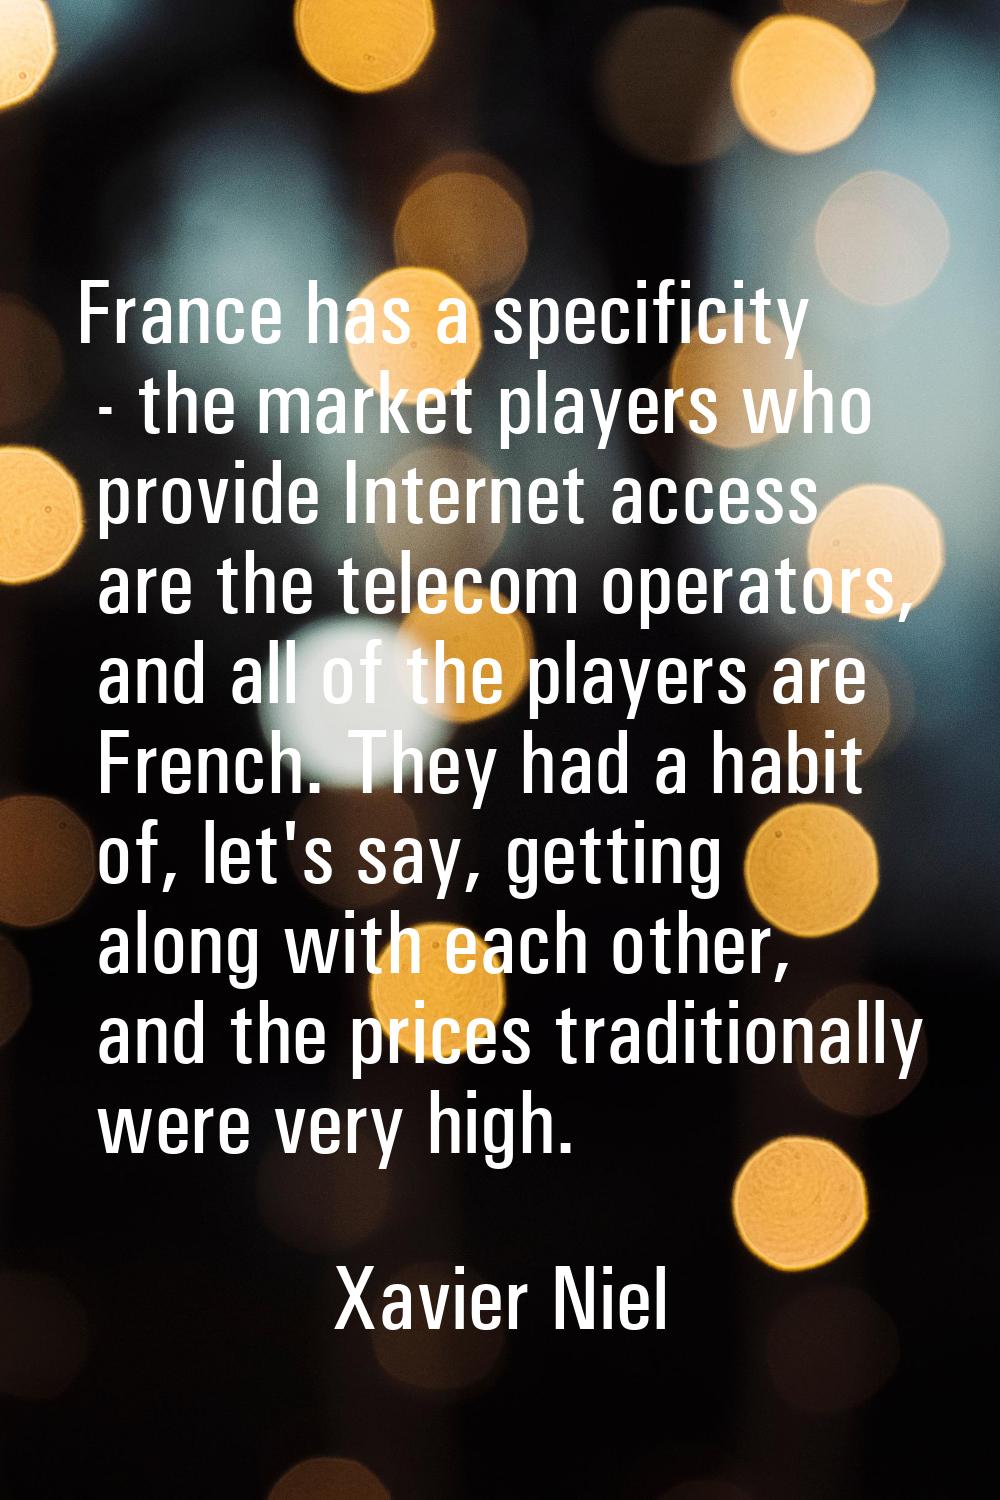 France has a specificity - the market players who provide Internet access are the telecom operators